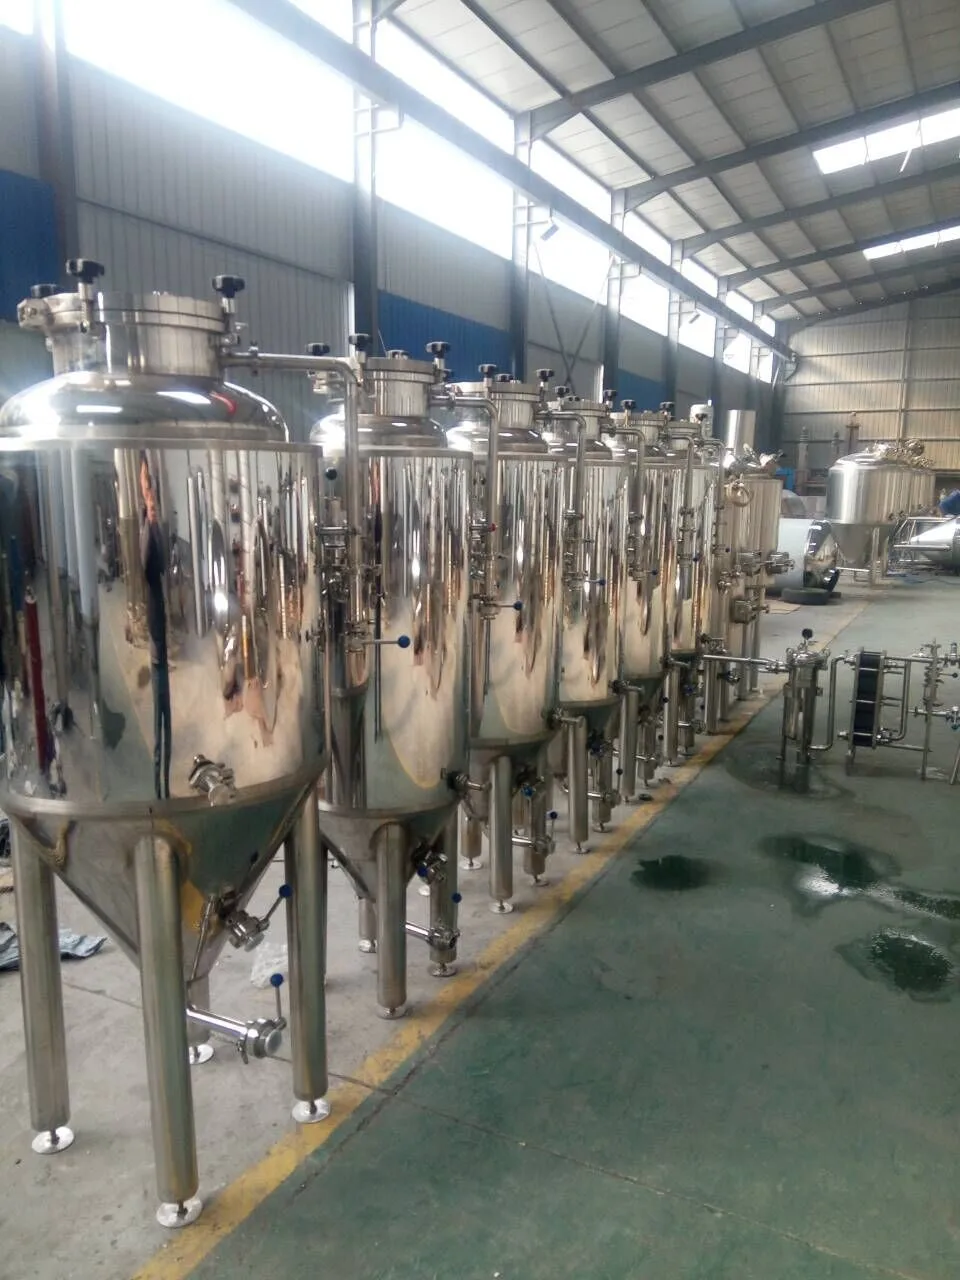 Reliable Quality Electric Commercial Beer Brewing Equipment 200l Beer Brewery System